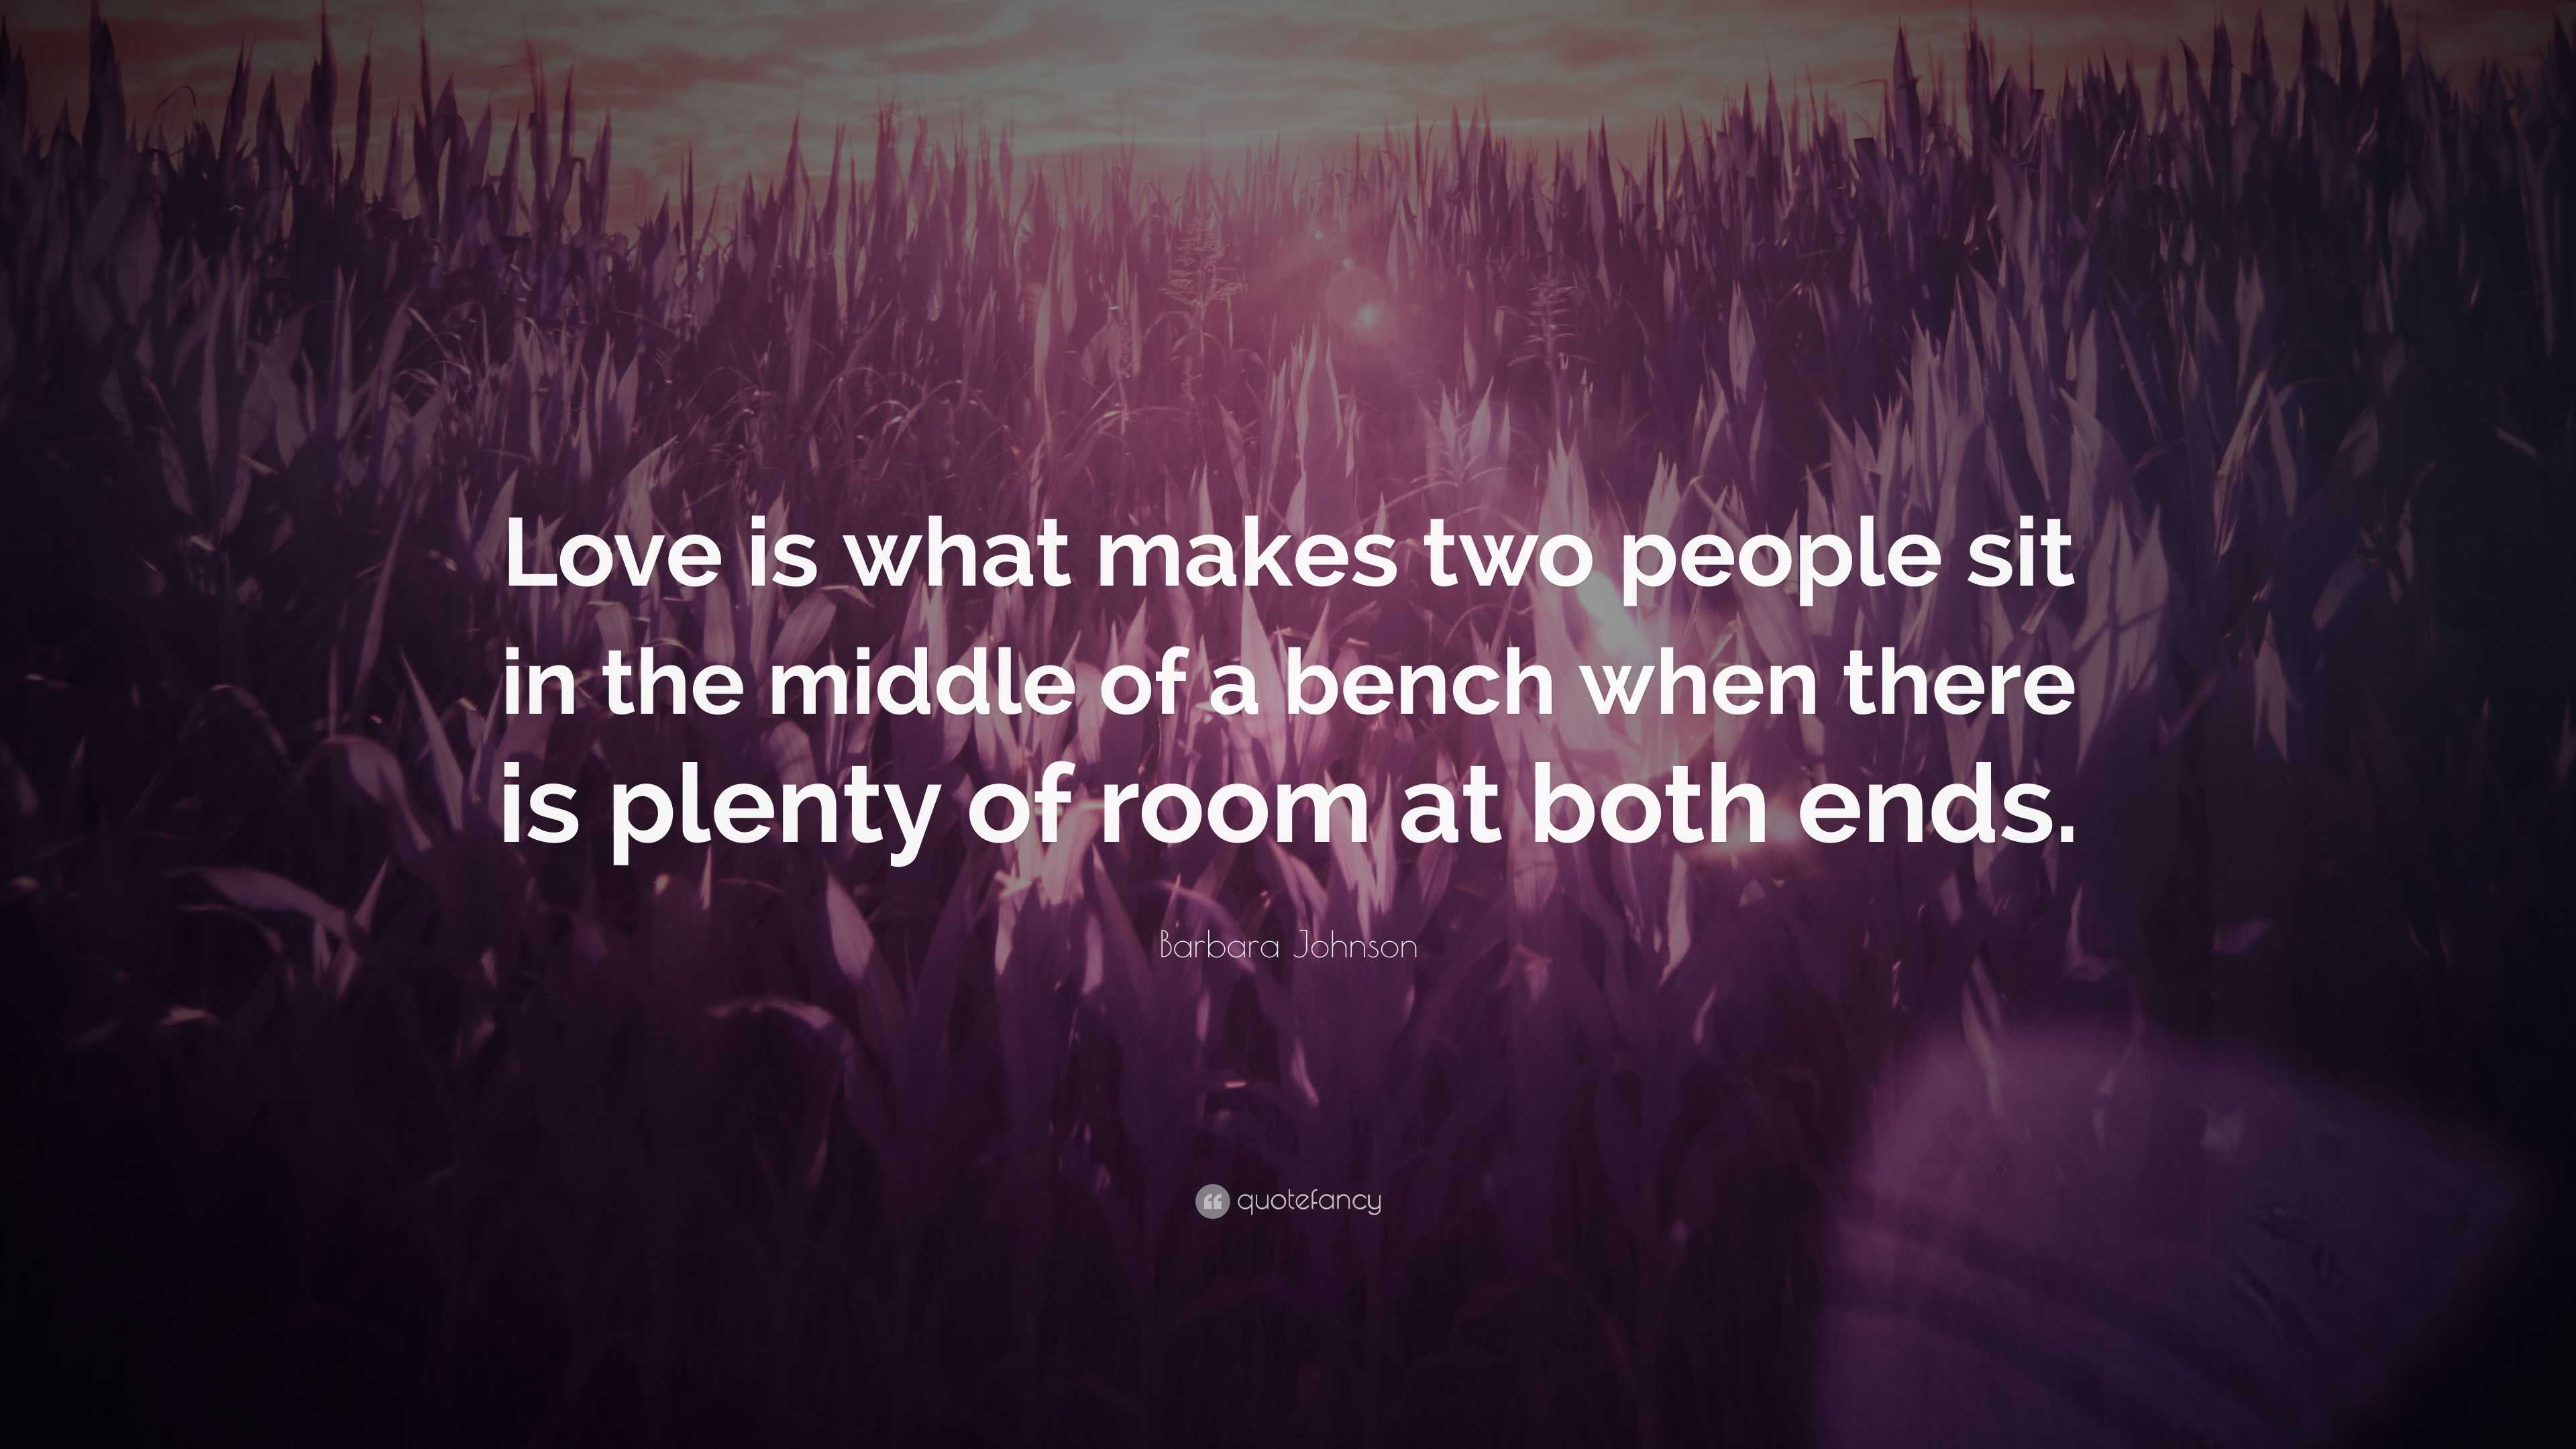 Barbara Johnson Quote: “Love is what makes two people sit in the middle ...